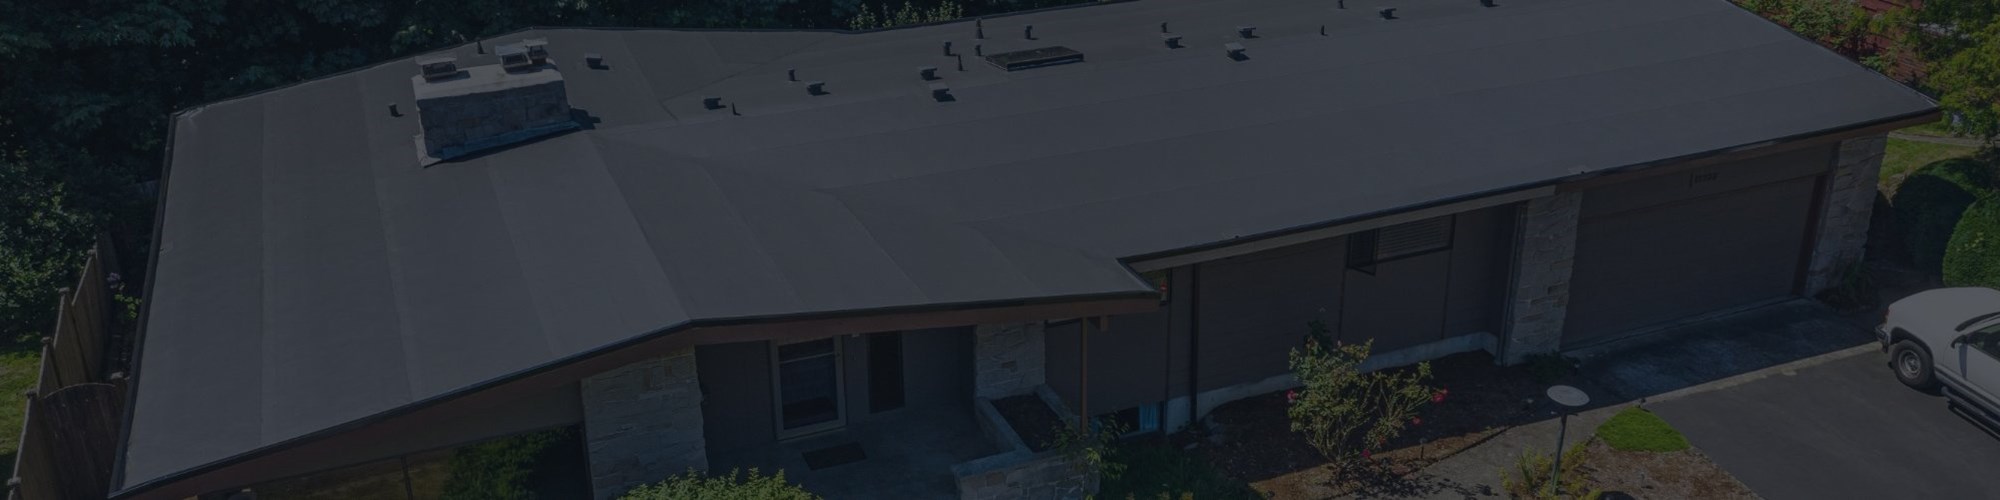 Low slope roofing system in Seattle, Washington